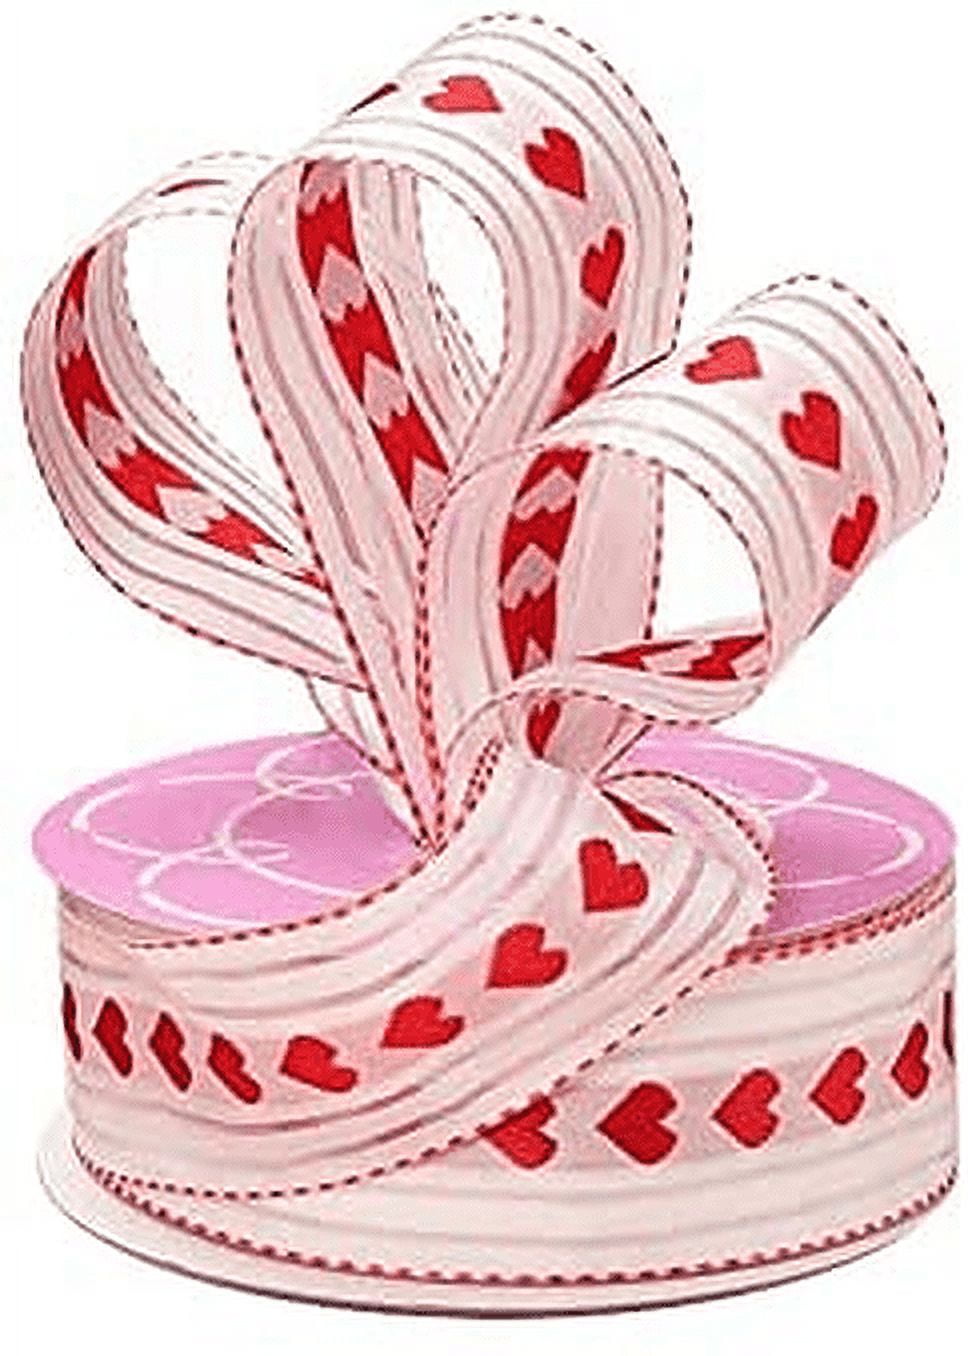 White Striped Hearts Valentine Ribbon – 1 1/2” x 25 Yards, Wired Edge, Red  Hearts, Christmas, Wreath, Wedding, Gift Basket, Gift Wrap, Bows